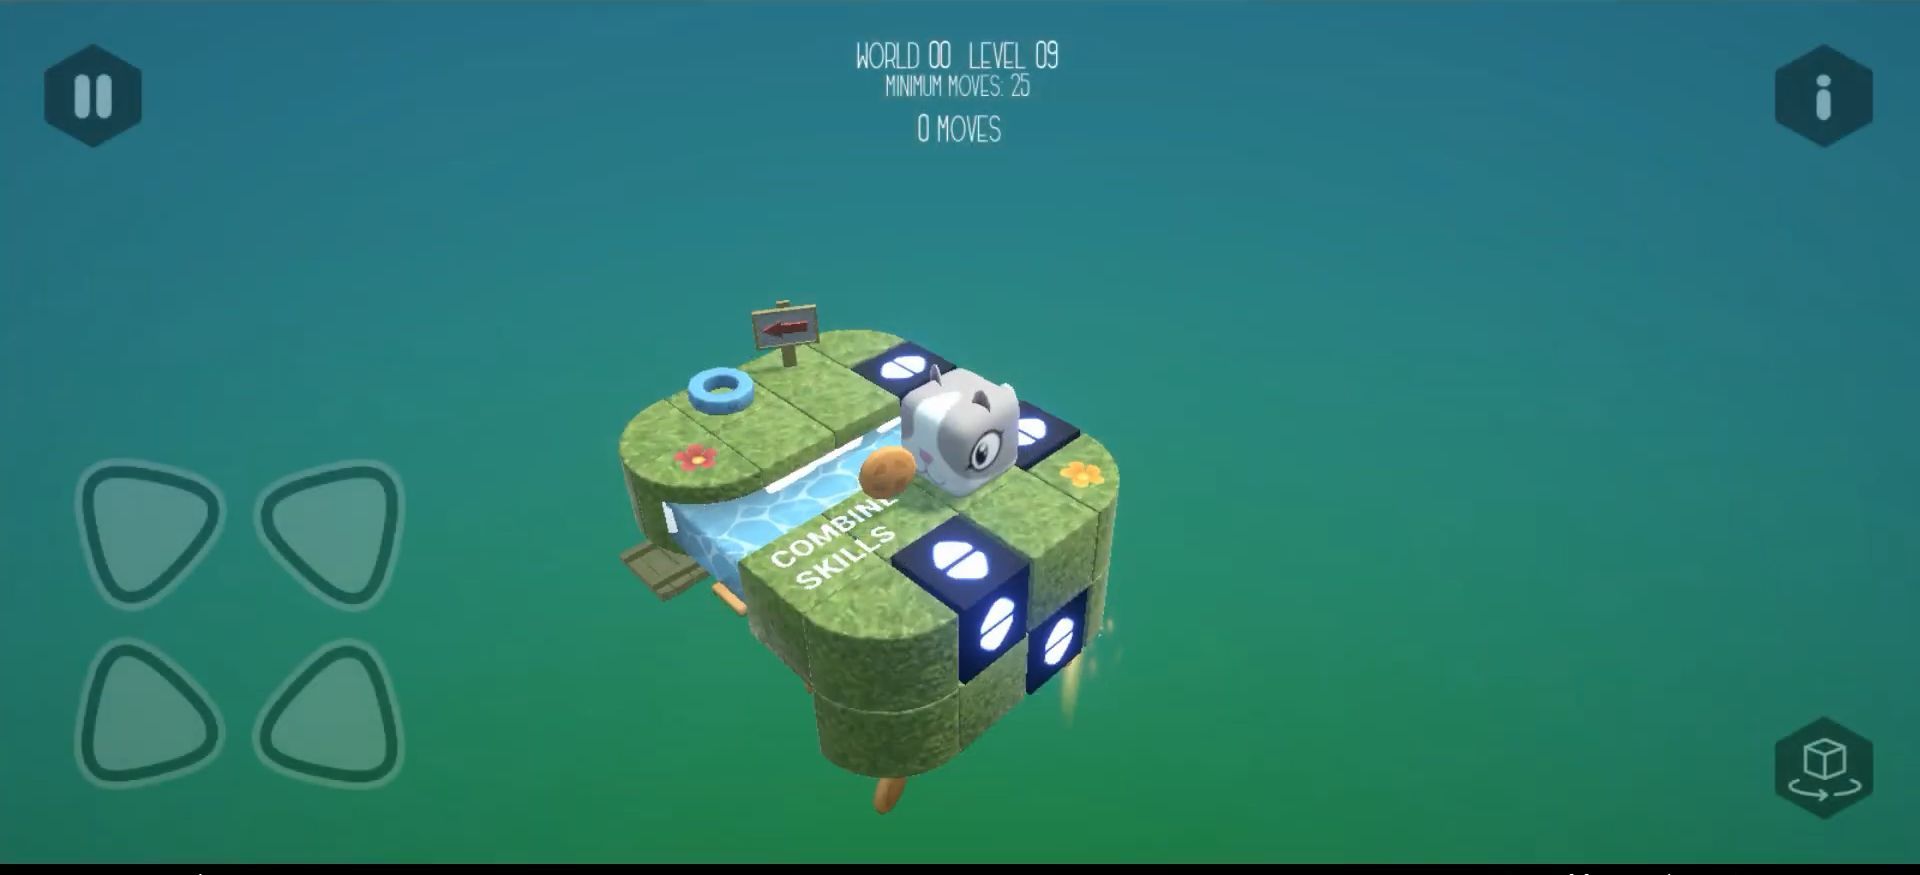 Mojito the Cat: 3D Puzzle labyrinth for Android